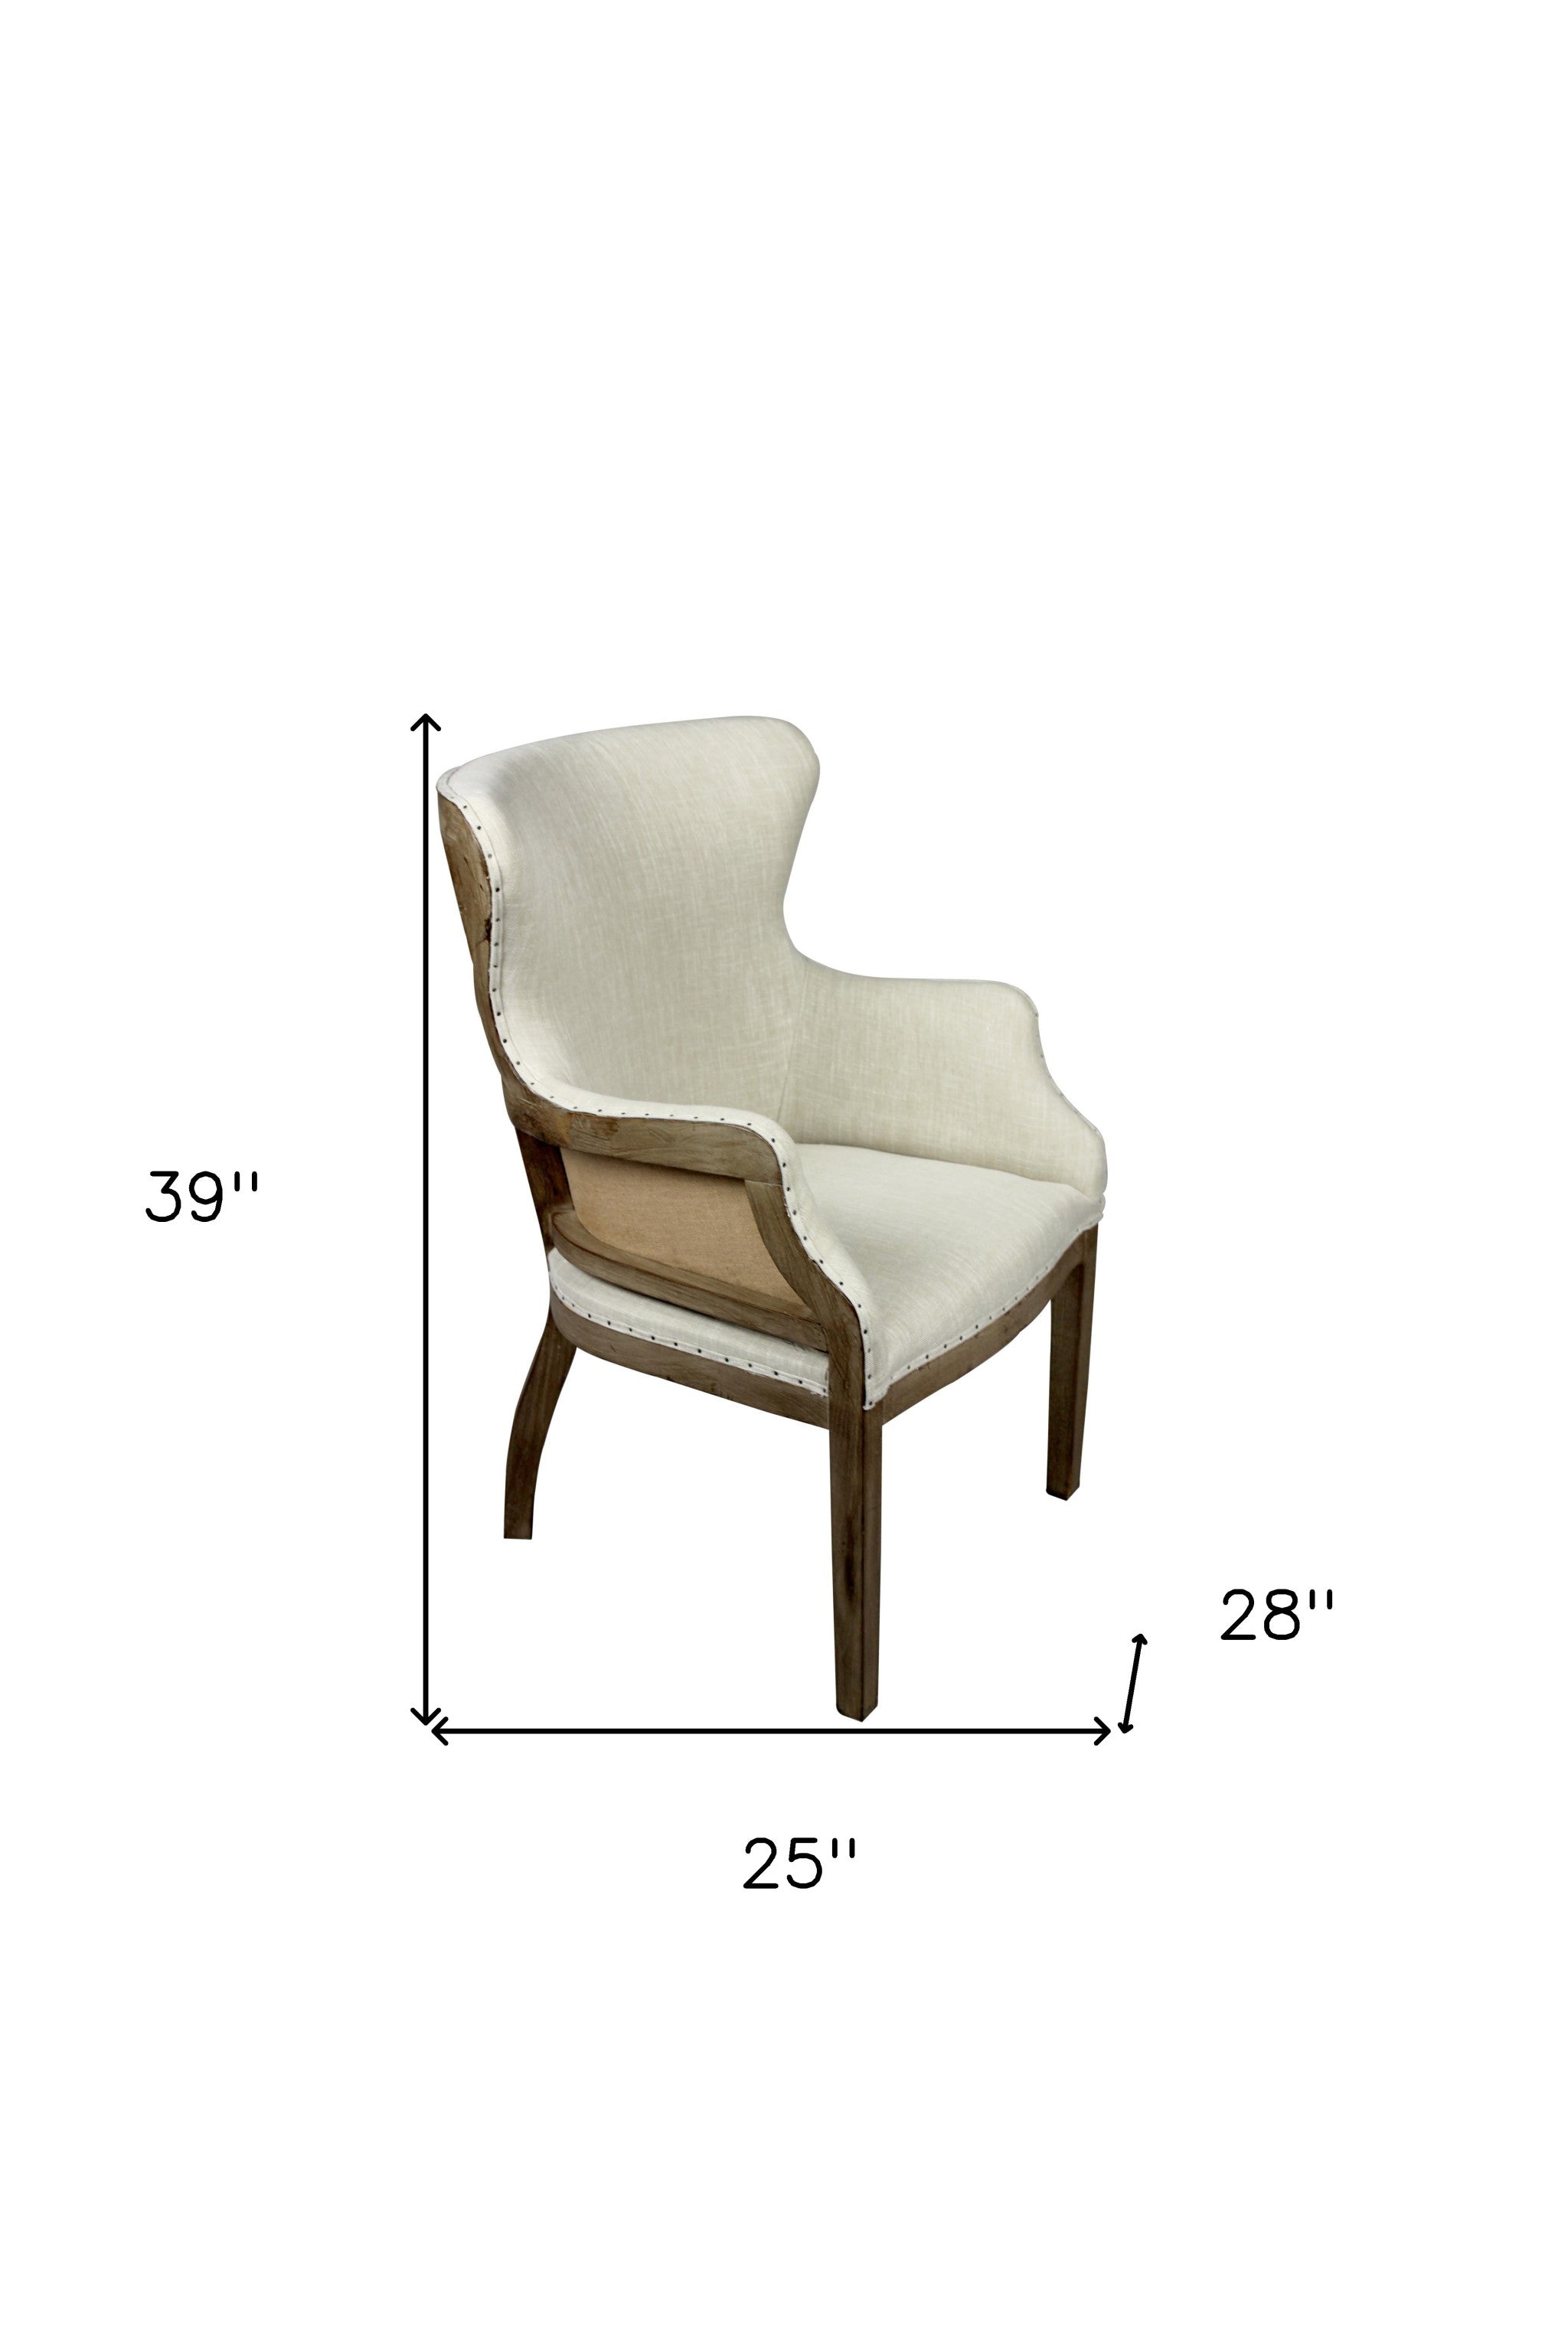 25" Natural Polyester Blend Solid Color Arm Chair